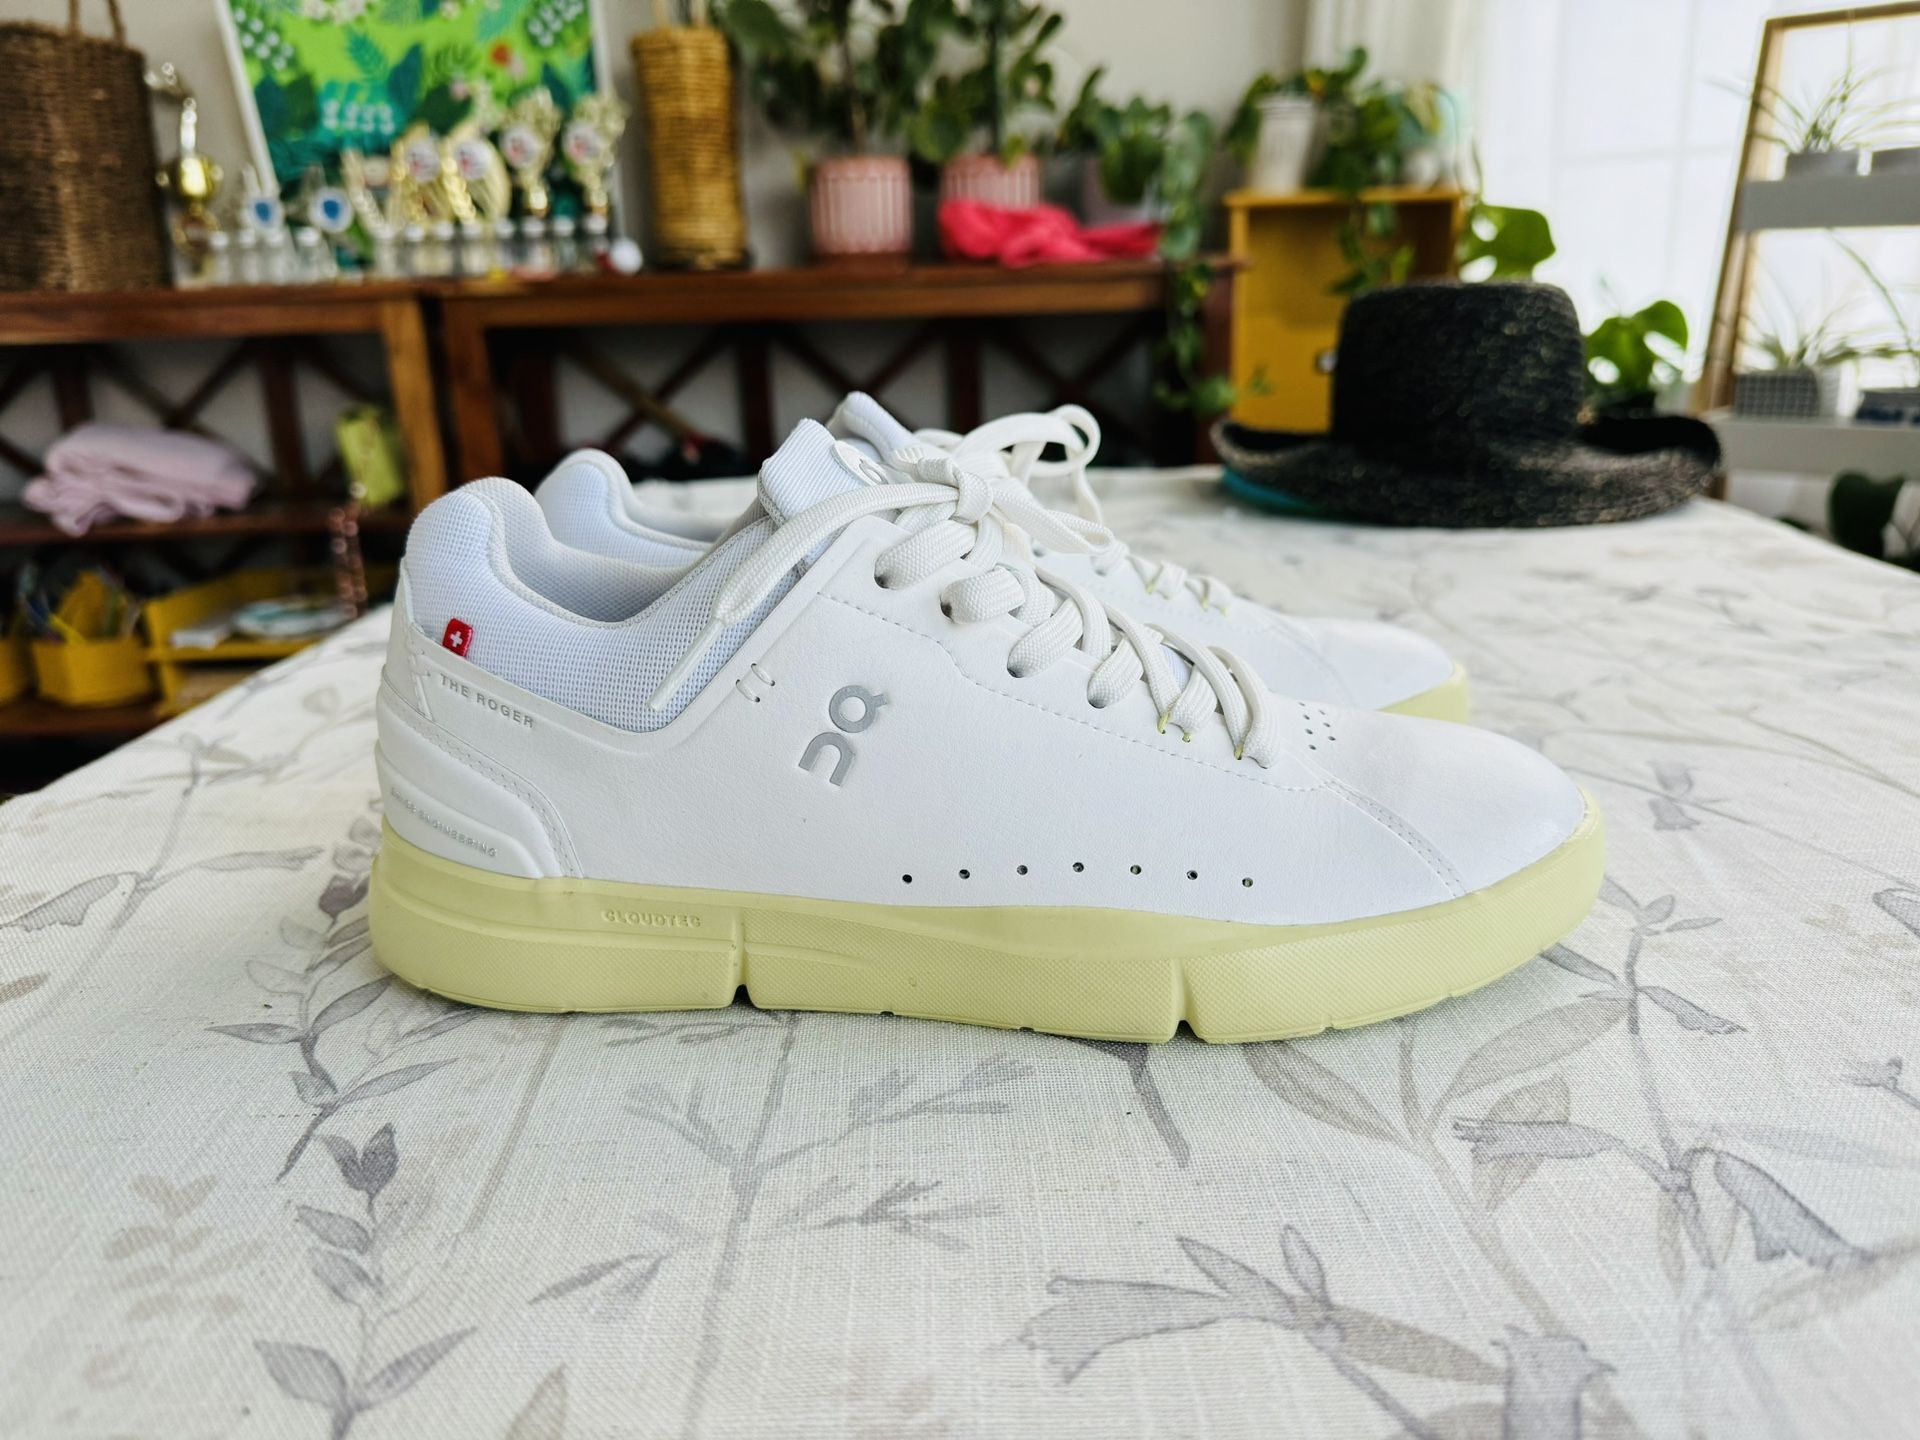 NWT On The Roger Advantage Shoes Women's 8.5/9 White/Hay 